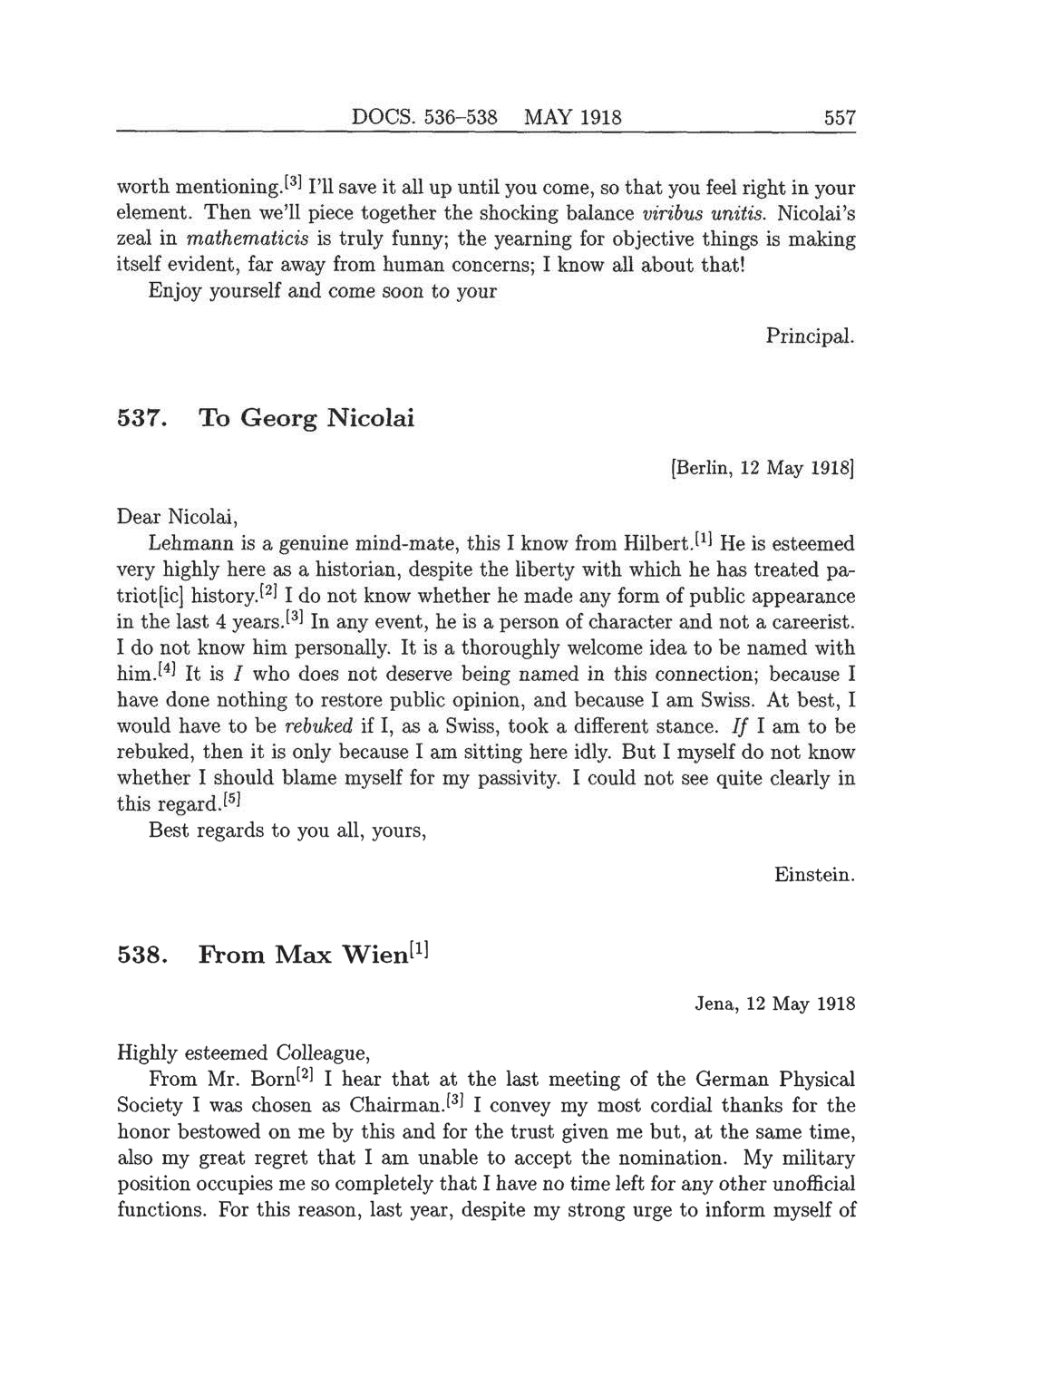 Volume 8: The Berlin Years: Correspondence, 1914-1918 (English translation supplement) page 557